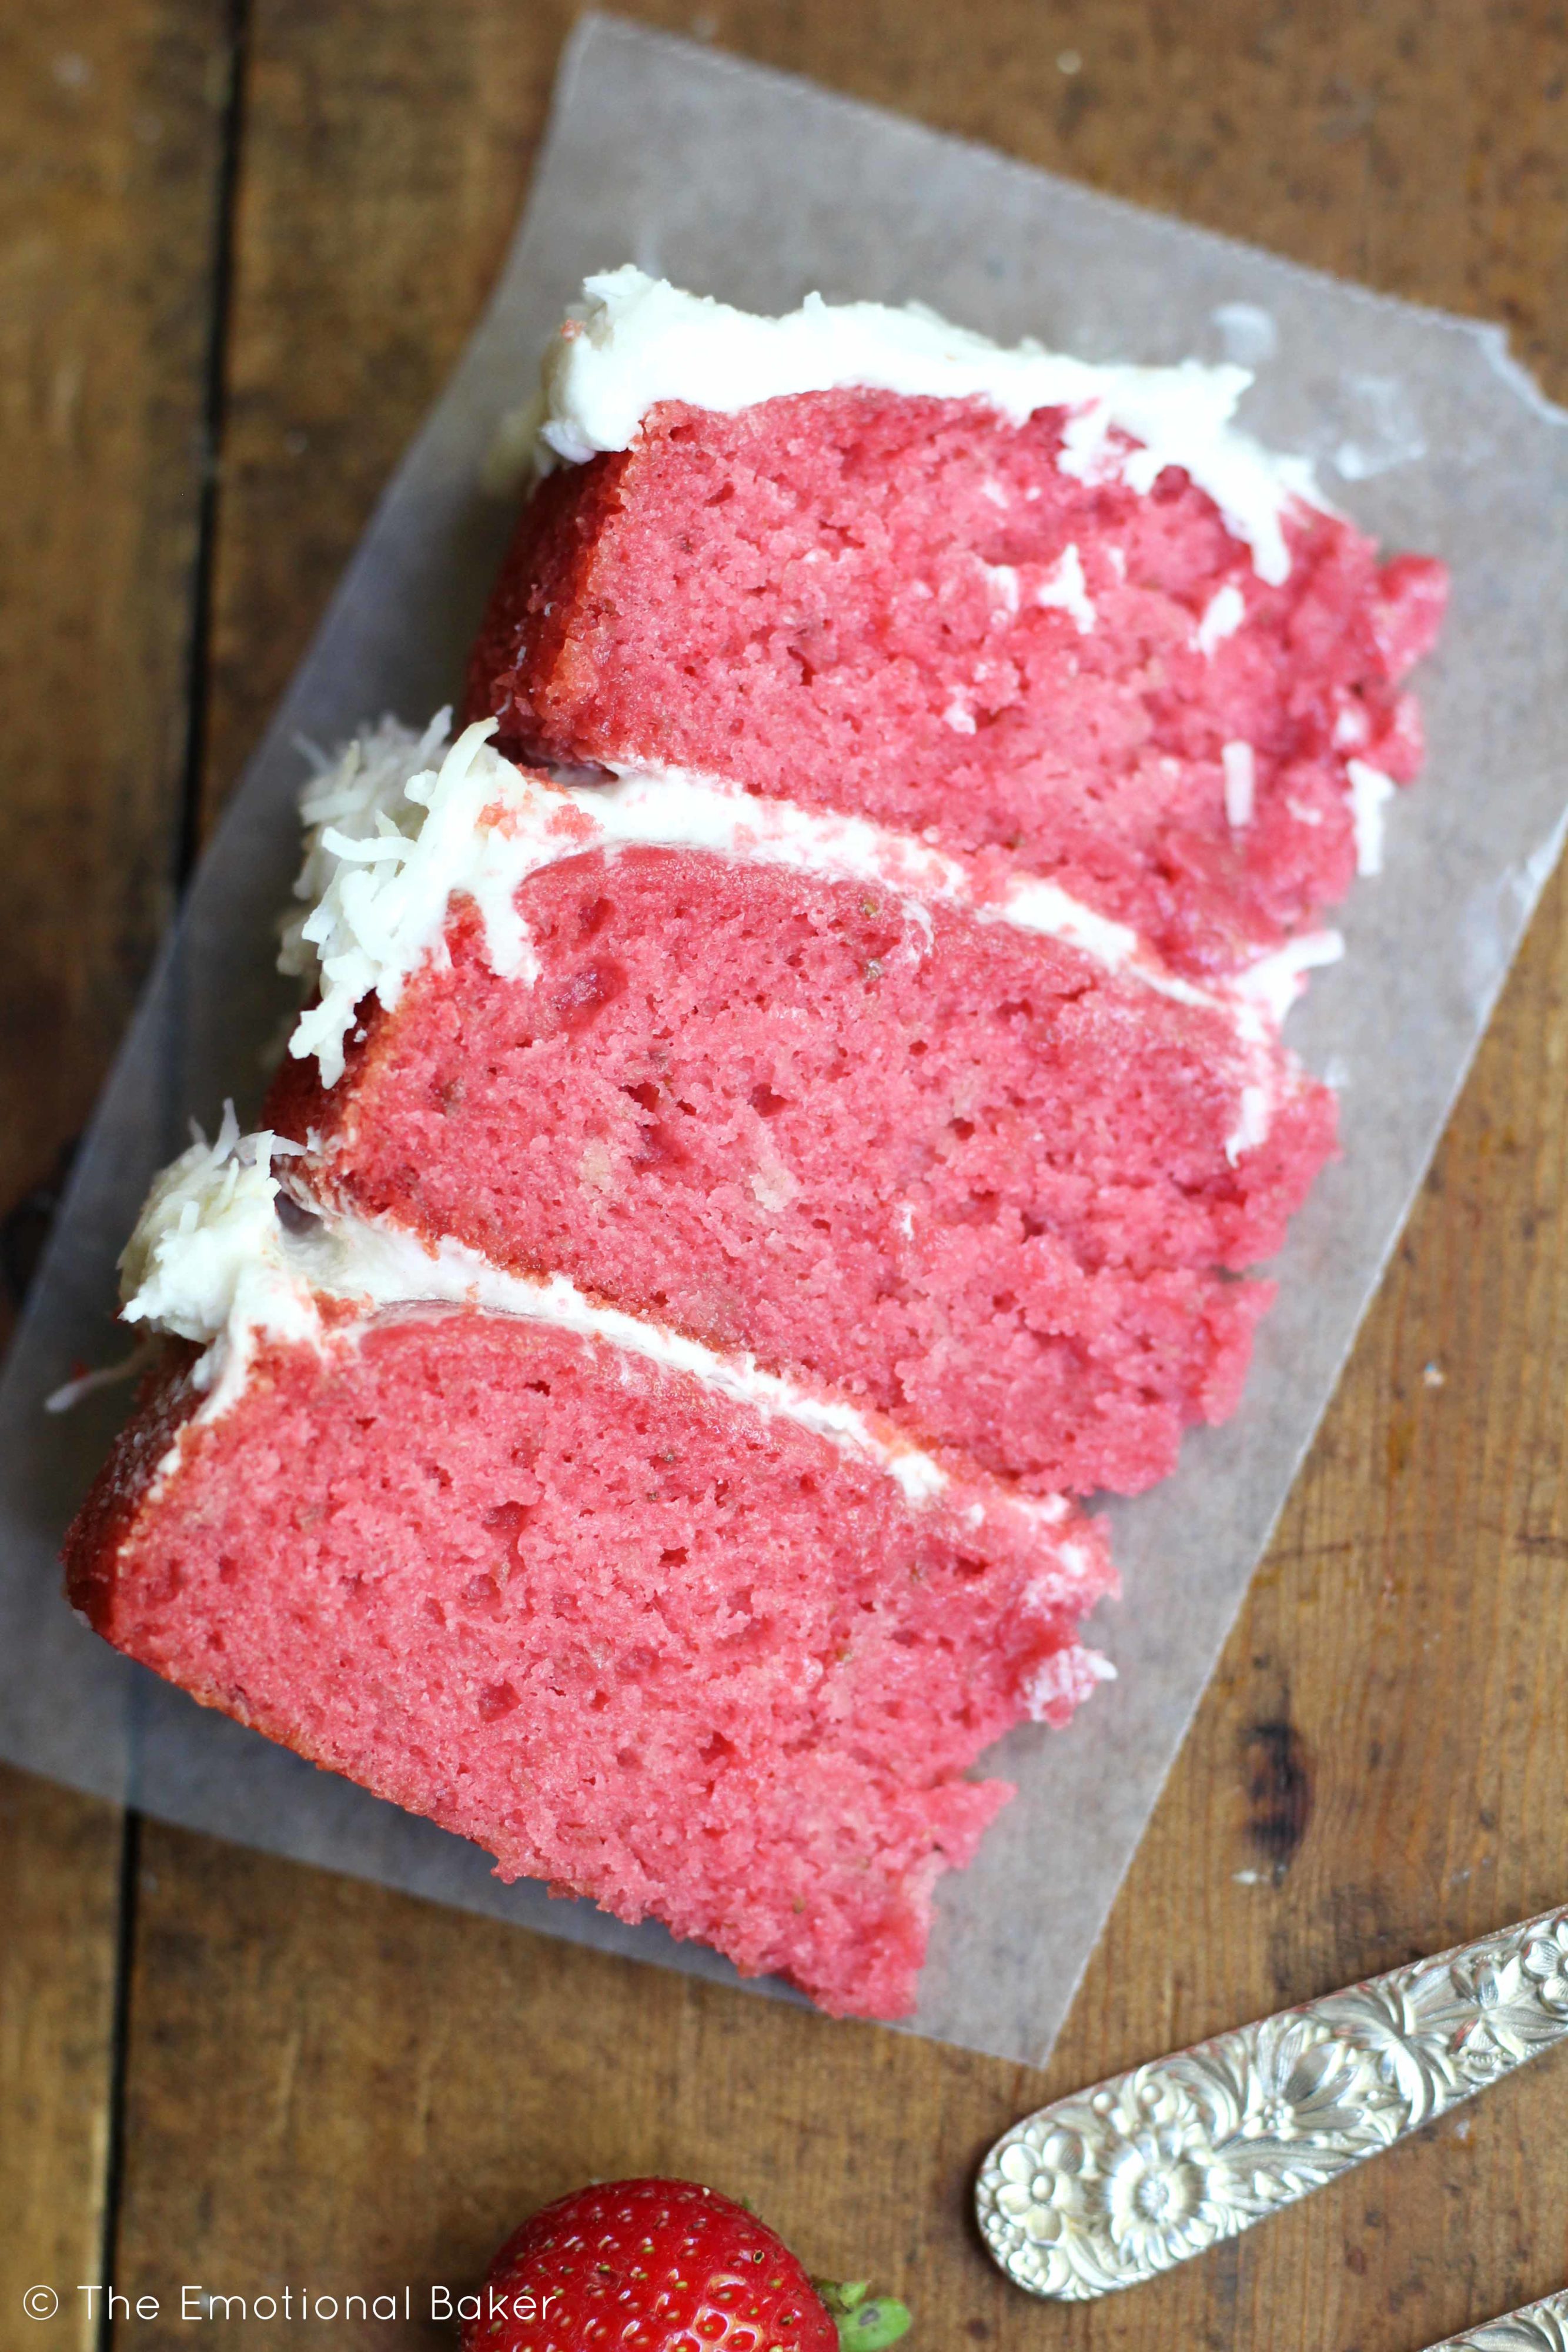 This 6 inch vegan strawberry cake is bursting with fresh strawberry flavor. It features layers of strawberry cake topped with coconut frosting.